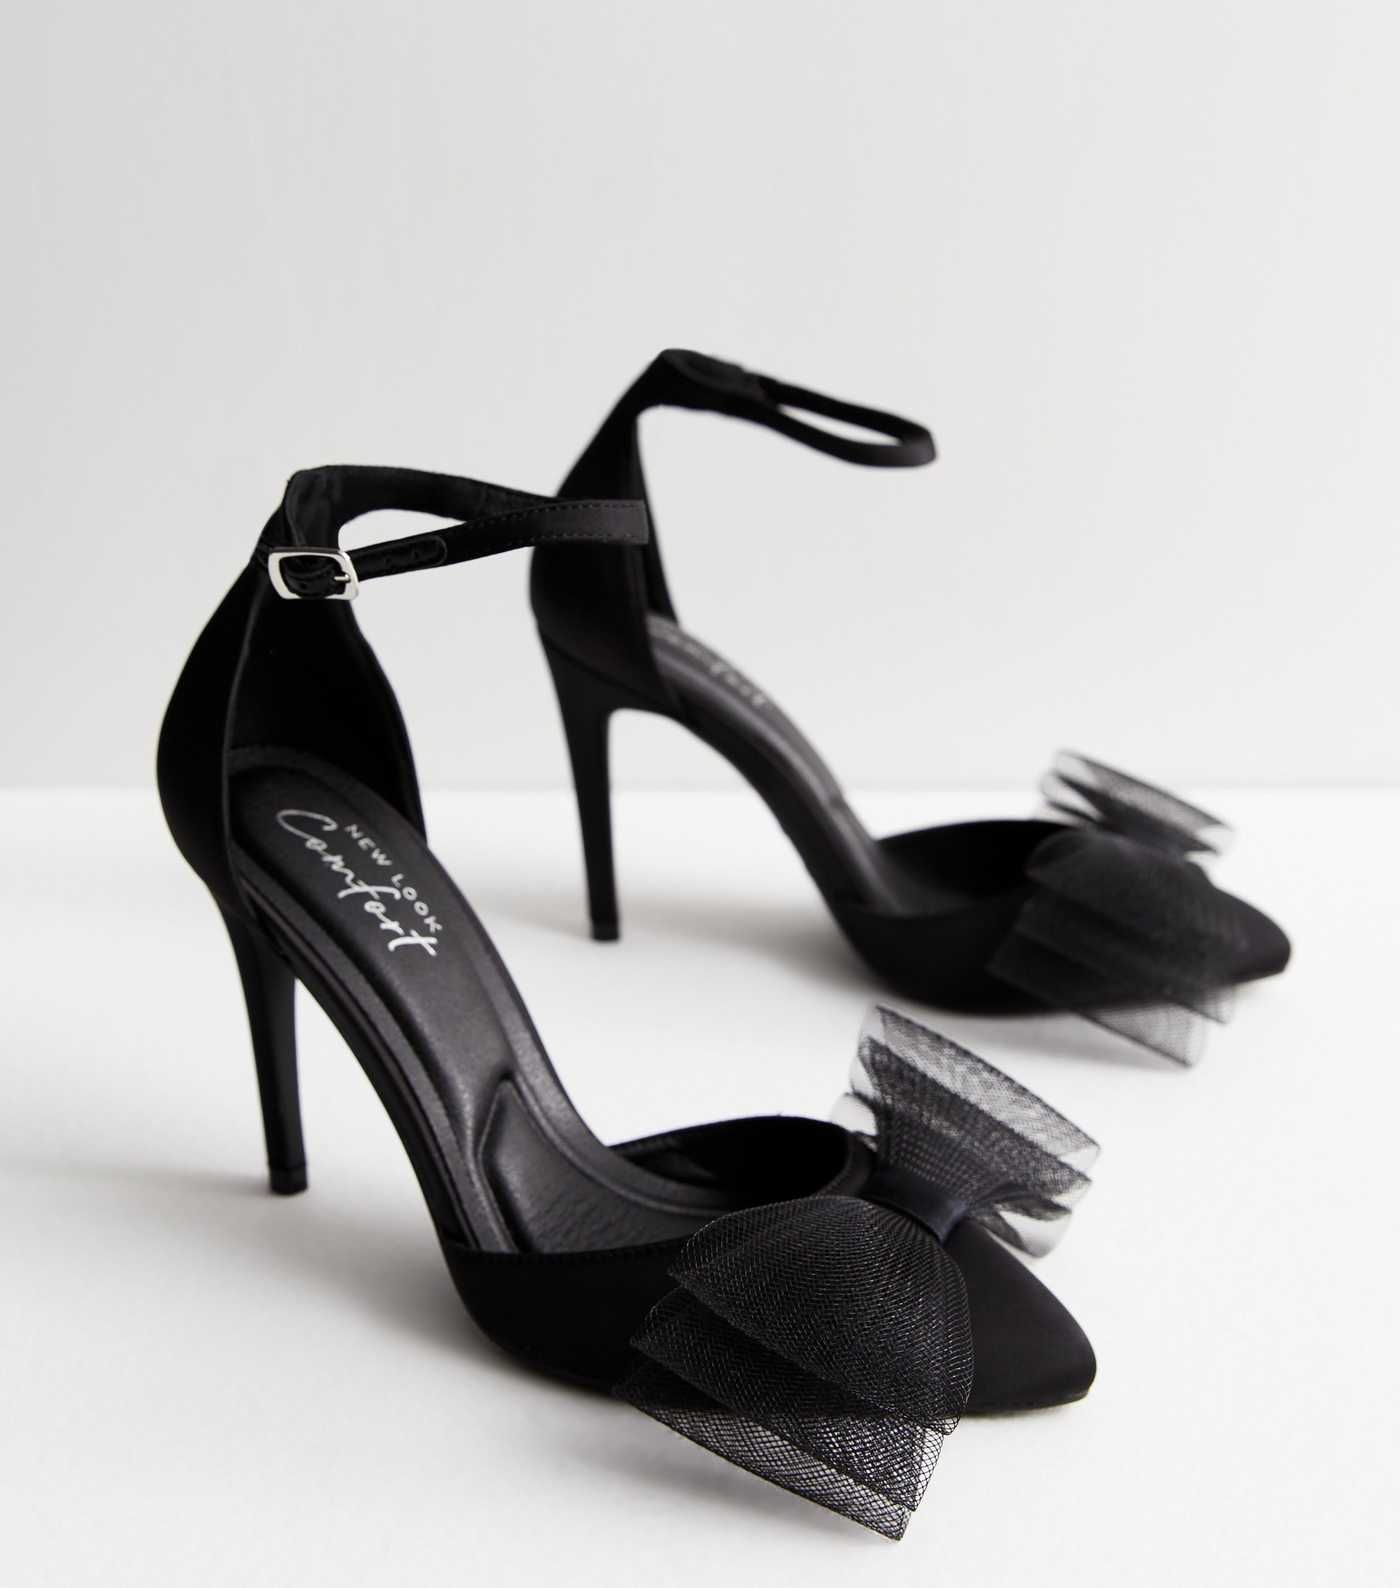 Black Satin Bow Front Stiletto Heel Court Shoes
						
						Add to Saved Items
						Remove from... | New Look (UK)